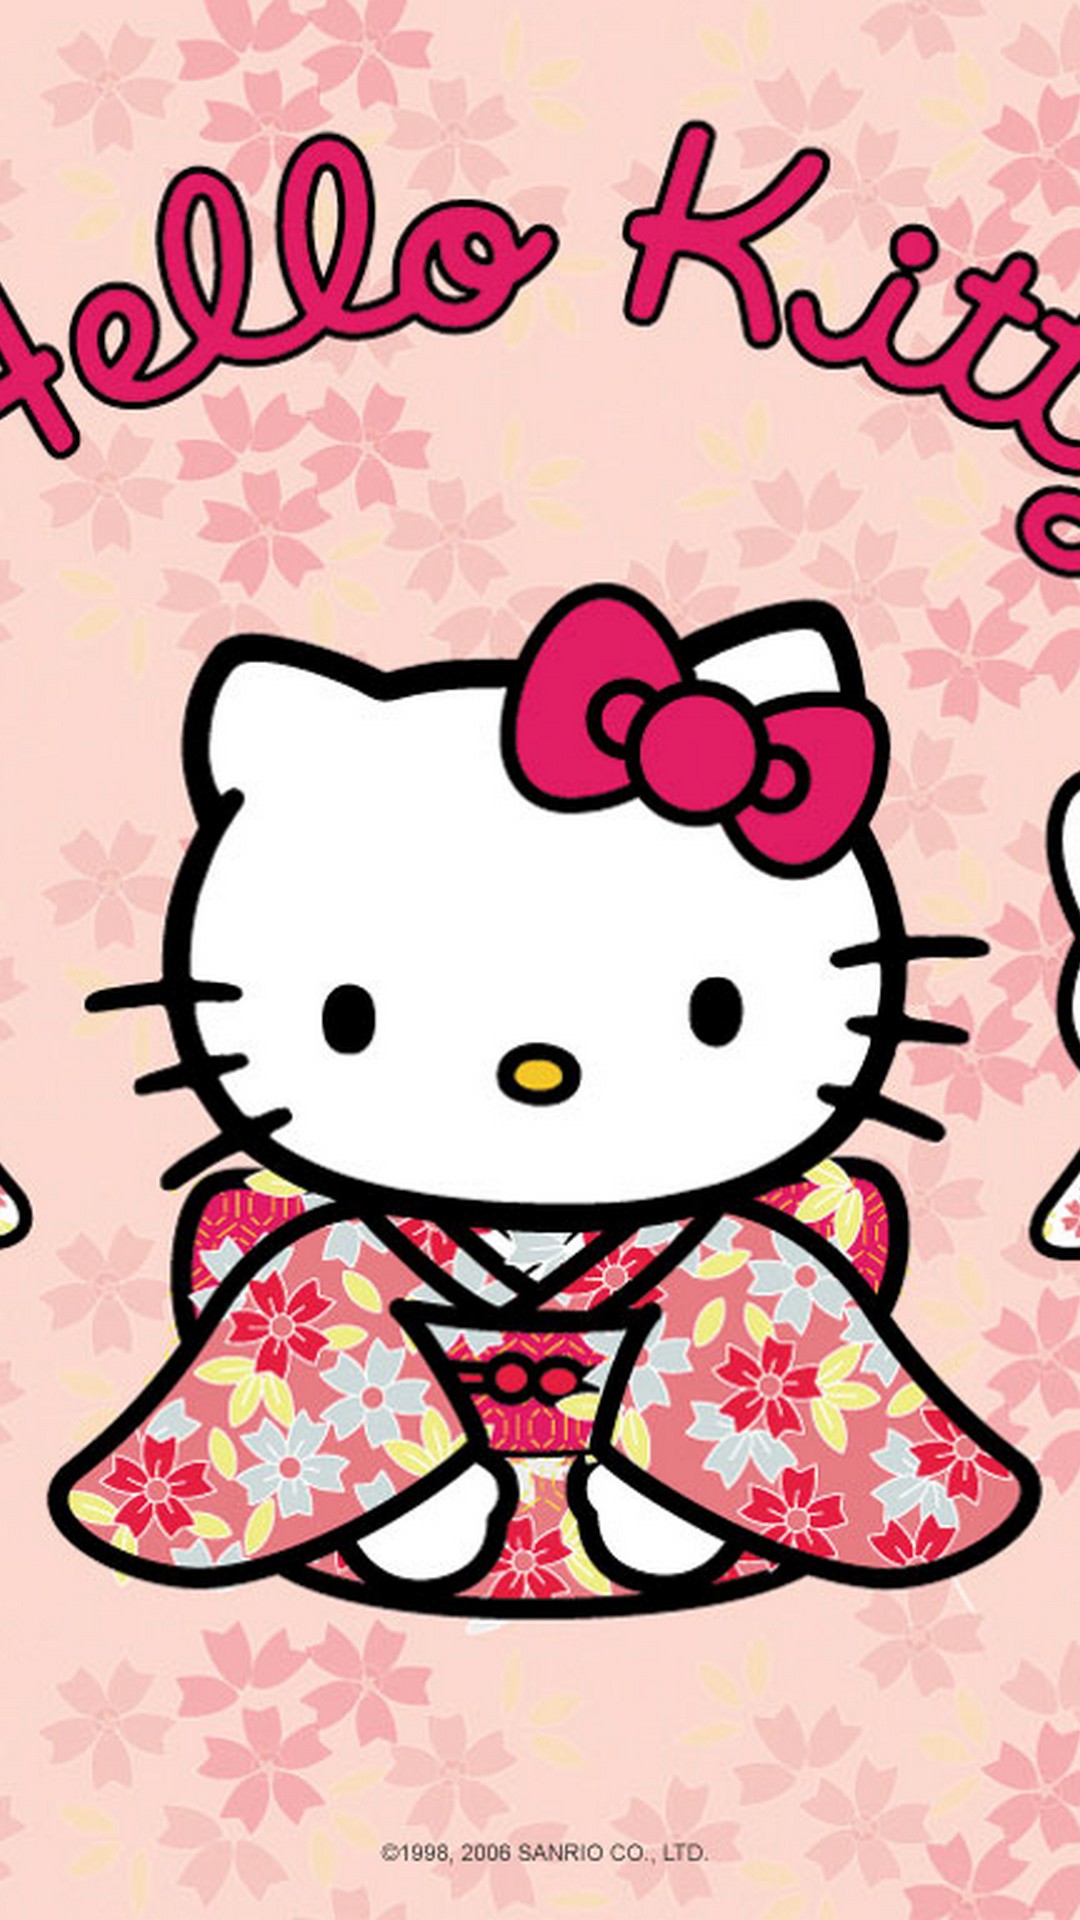 Wallpaper iPhone Hello Kitty Characters with resolution 1080X1920 pixel. You can make this wallpaper for your iPhone 5, 6, 7, 8, X backgrounds, Mobile Screensaver, or iPad Lock Screen